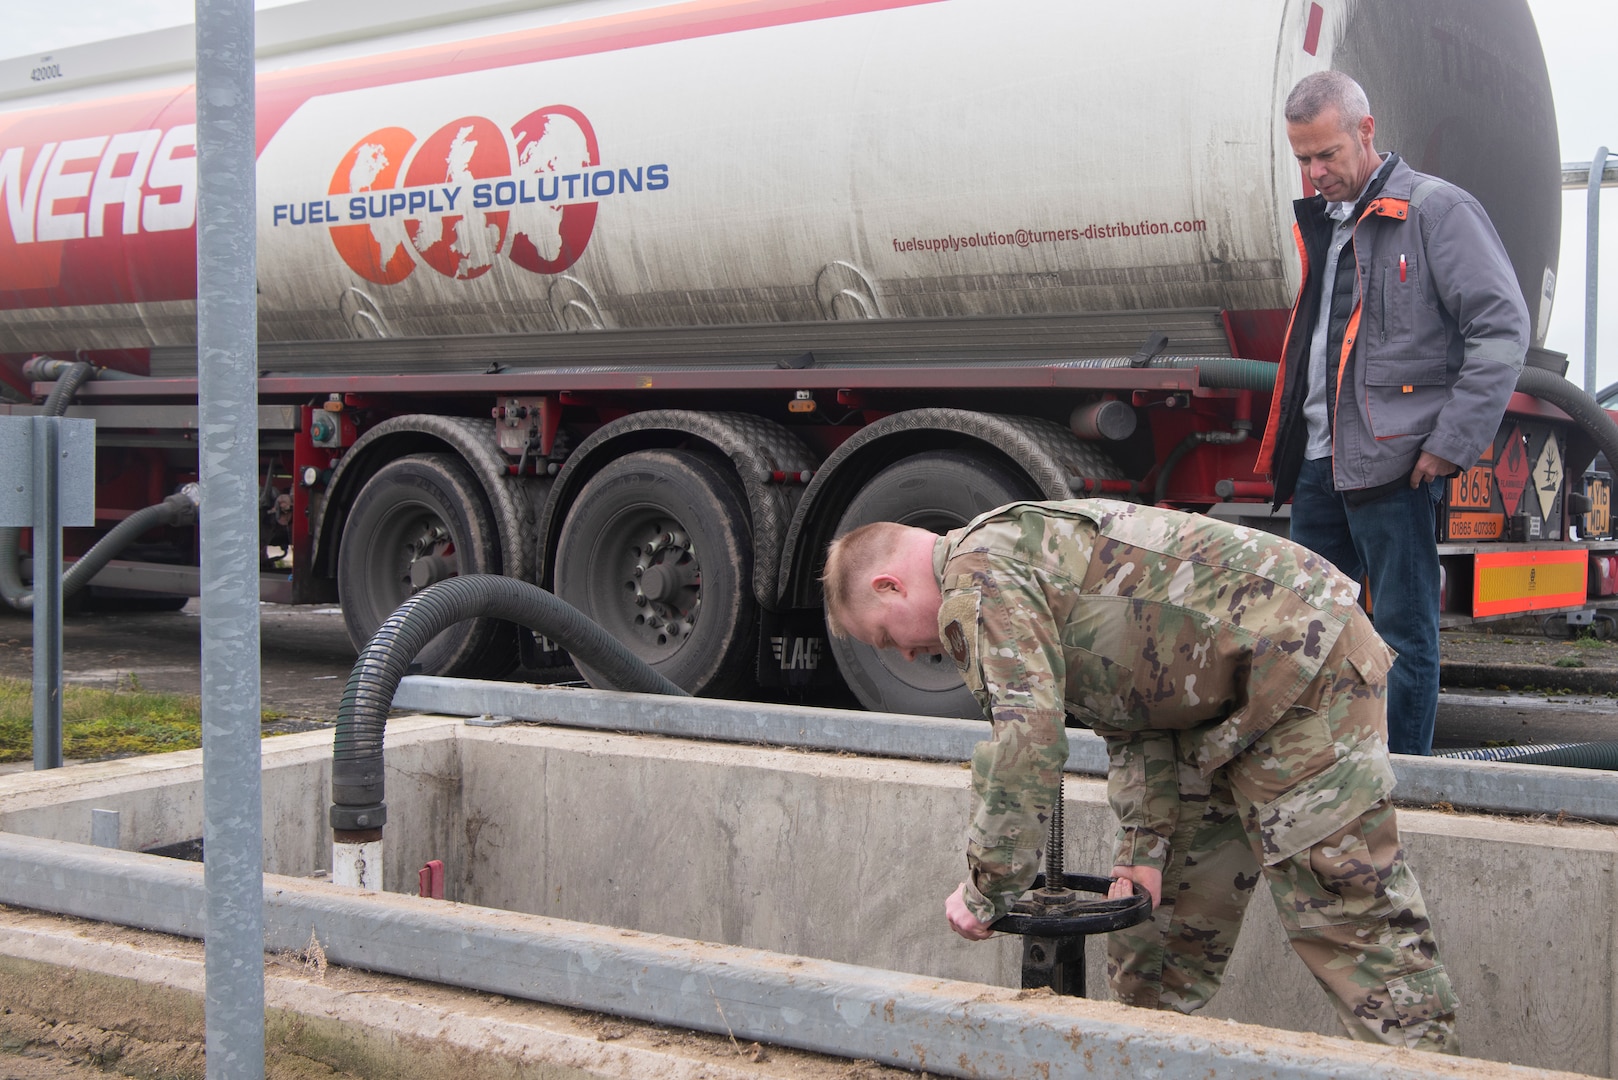 Master Sgt. Joseph Feiss, 100th Logistics Readiness Squadron noncommissioned officer in charge of fuels environmental safety office, closes the valves to underground fuel tanks as Mike Wilson, Defense Logistics Agency quality assurance representative, watches Jan. 27, 2020, at RAF Mildenhall, England. Petroleum, oil and lubricants Airmen from RAF Mildenhall power the only aerial refueling wing for United States Air Forces in Europe and Air Forces Africa. (U.S. Air Force photo by Airman 1st Class Joseph Barron)